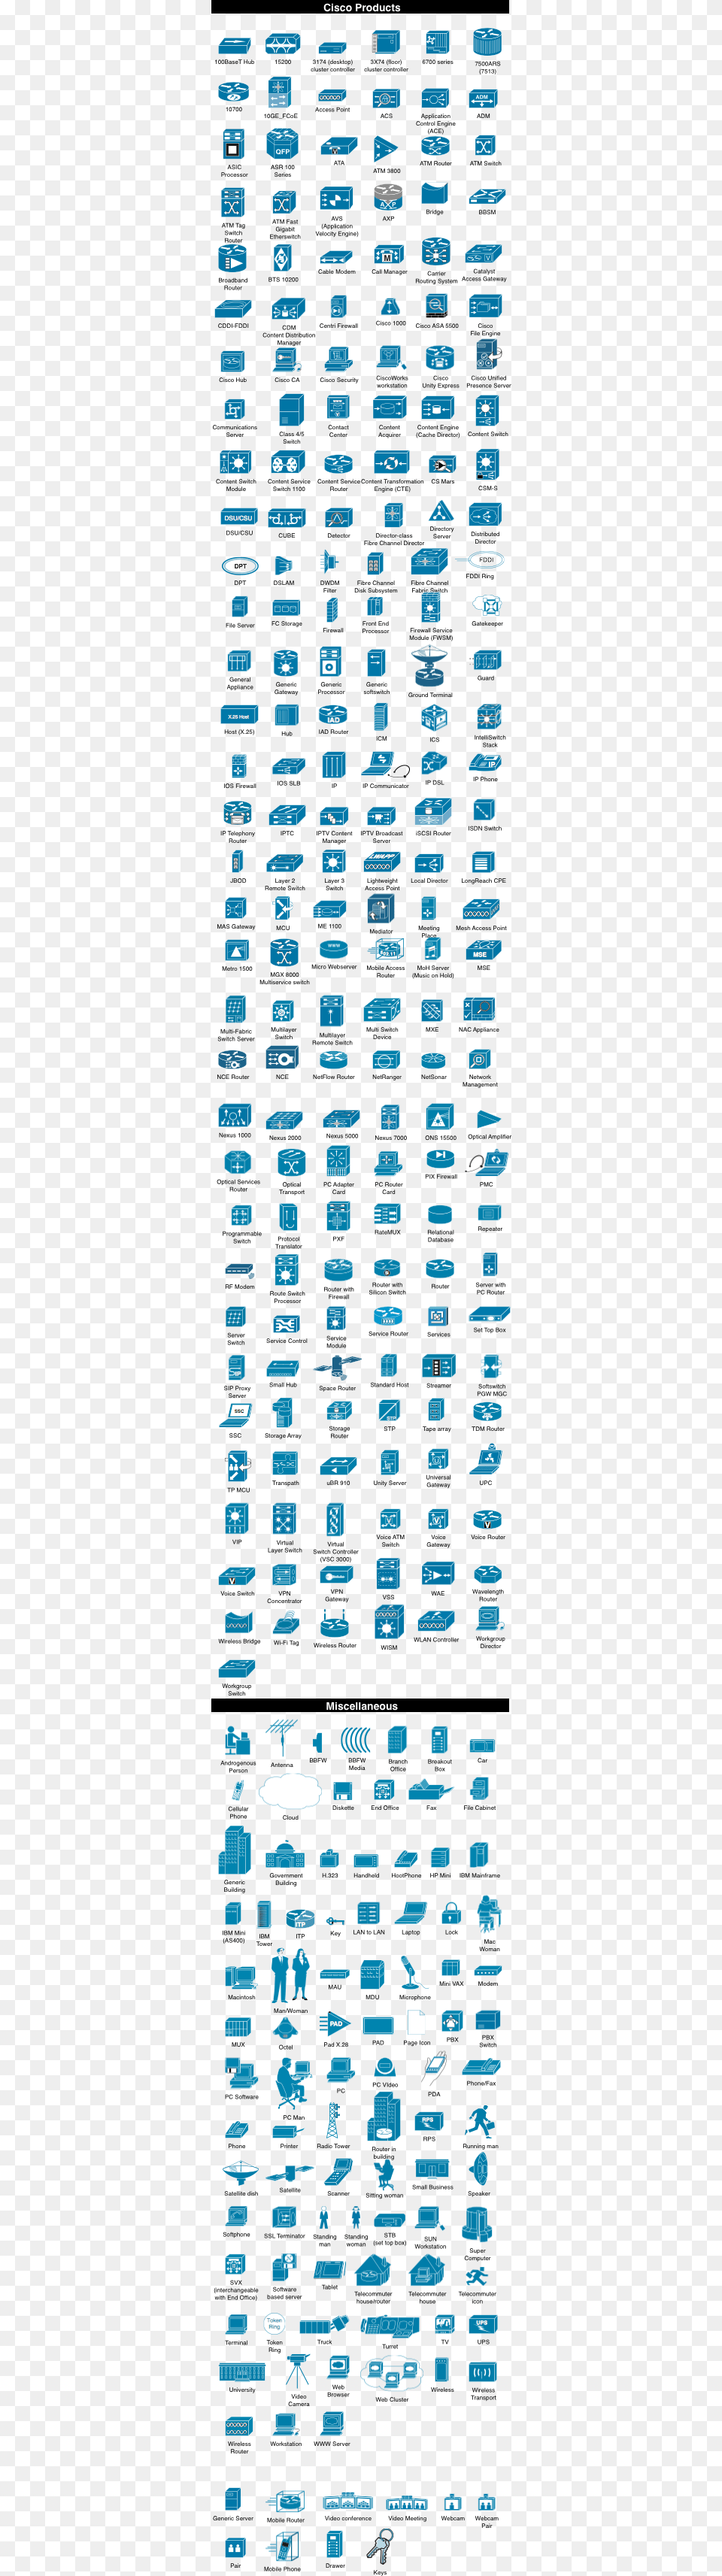 Network Topology Icons, Text, Texture, Home Decor Png Image